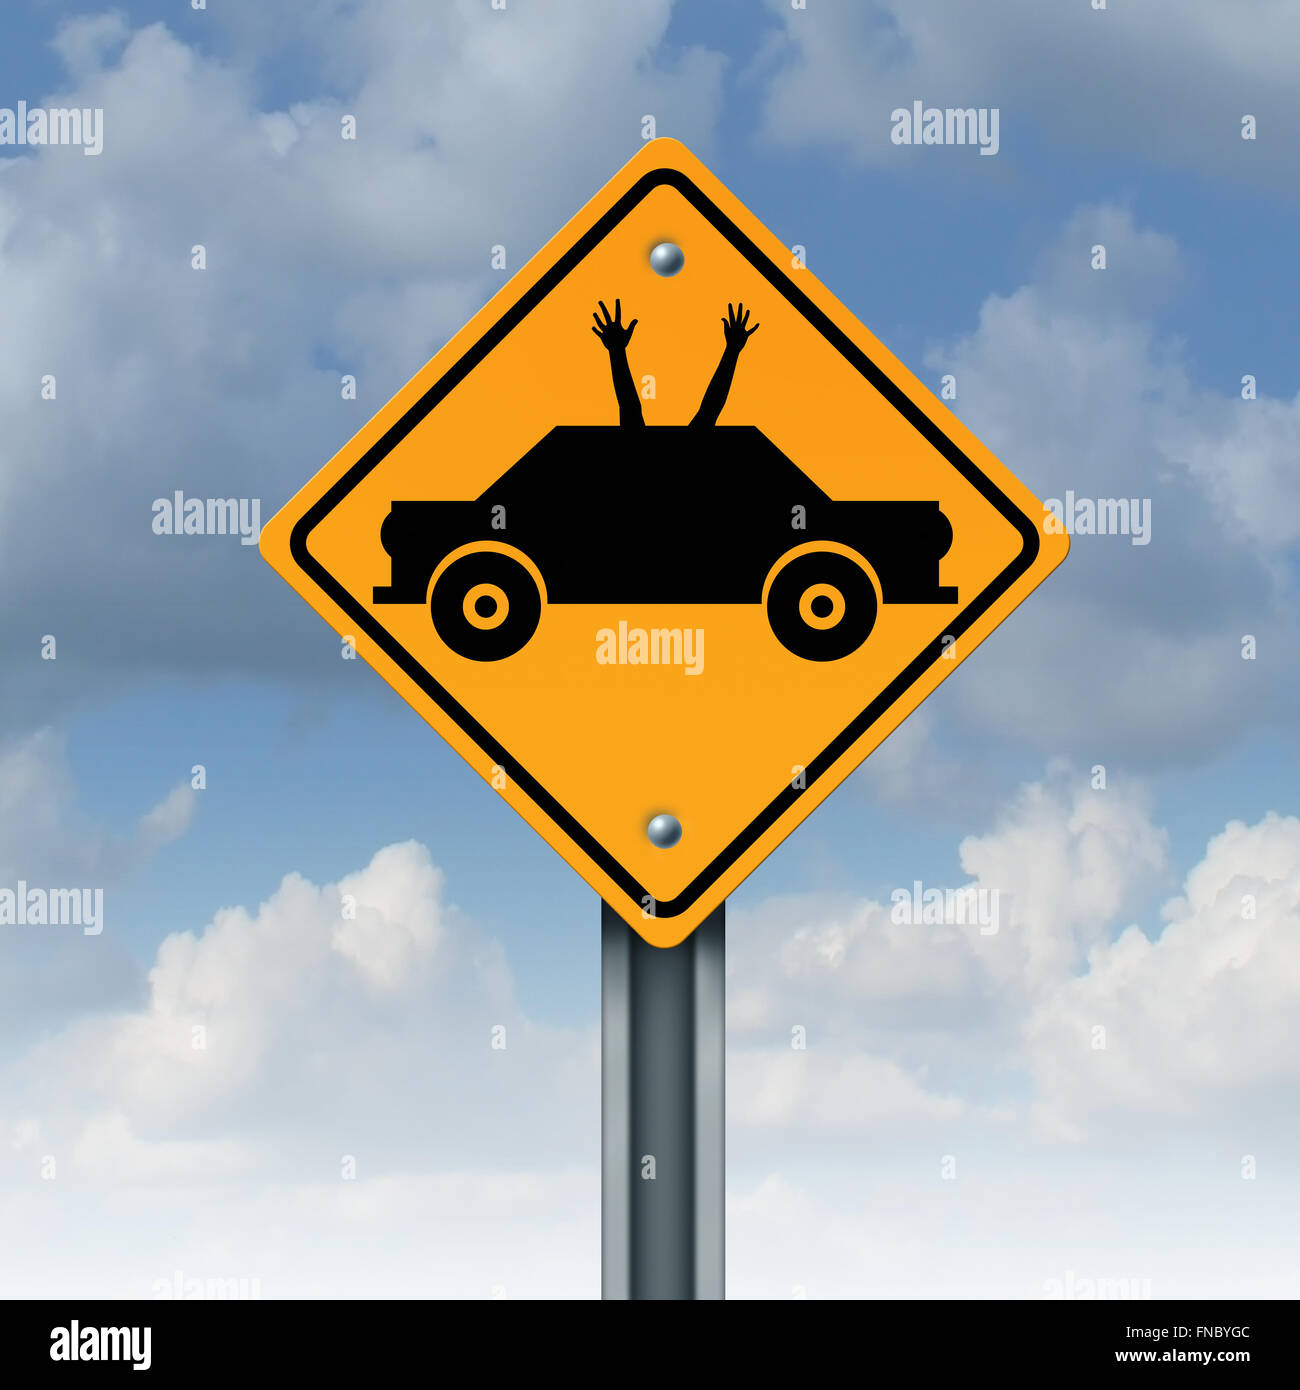 Autonomous driving concept and driverless car safety system symbol as a road traffic sign as an automobile icon with human hands and arms waving up to the sky as a metaphor for hands free autopilot transportation technology. Stock Photo